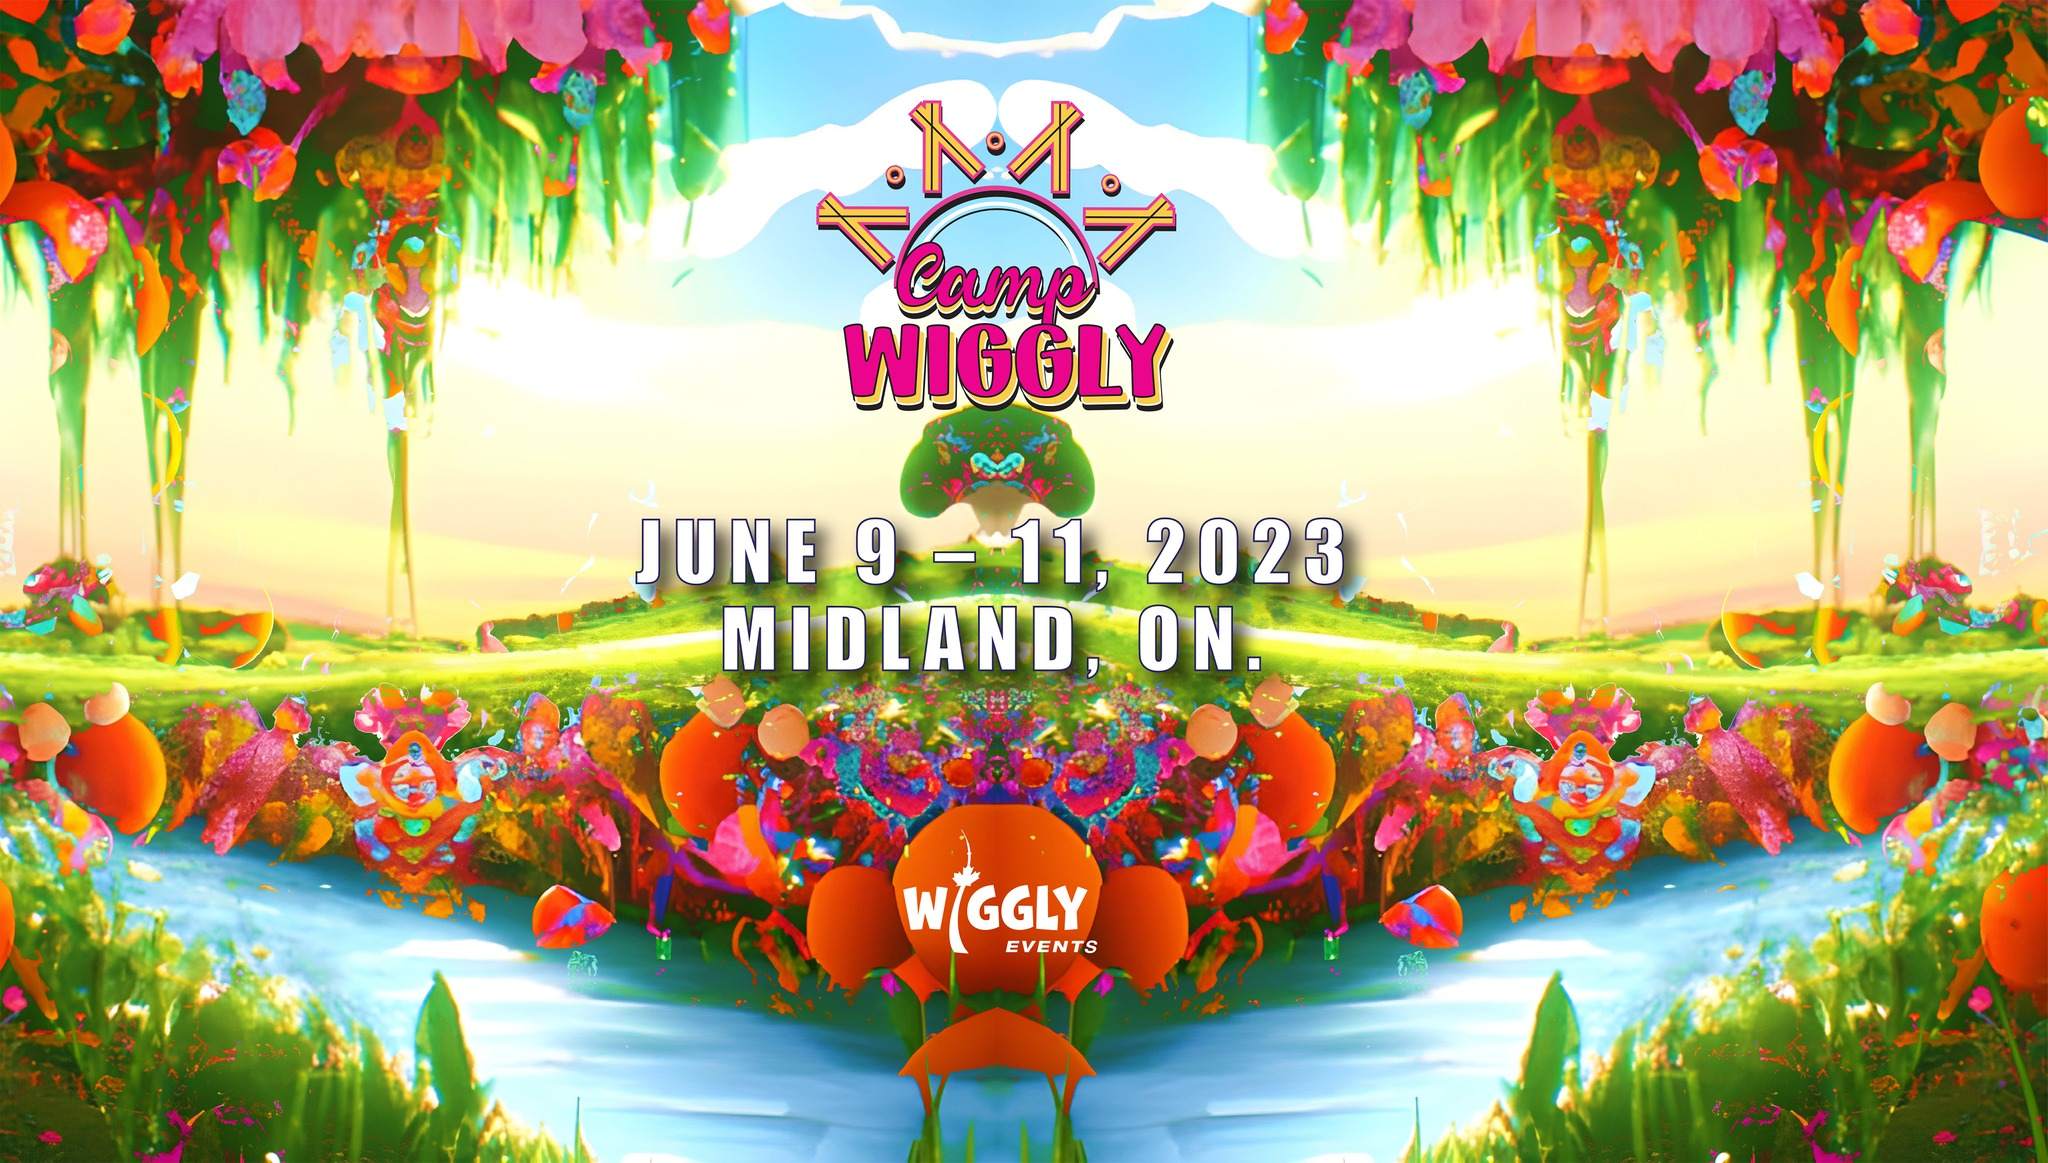 Camp Wiggly 23 - フライヤー表